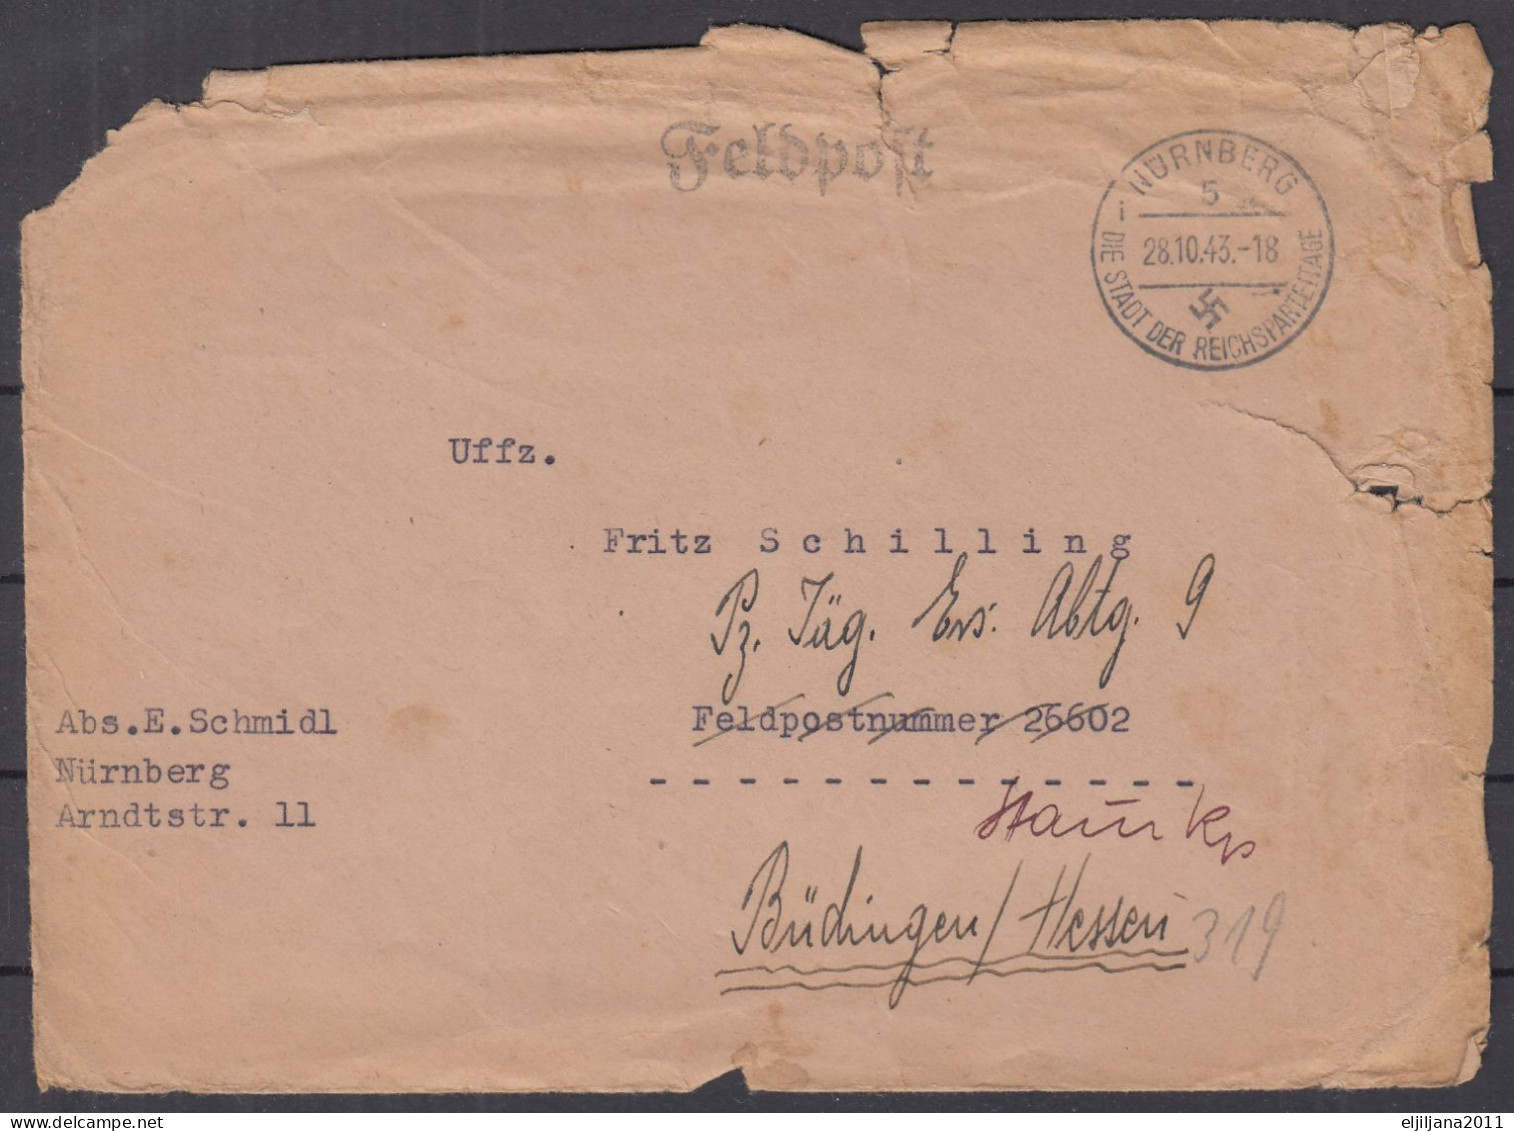 ⁕ Germany, Deutsches Reich 1940 - 1942 WWII ⁕ FELDPOST - MILITARY MAIL ⁕ 5v old cover (some with letters) - see scan